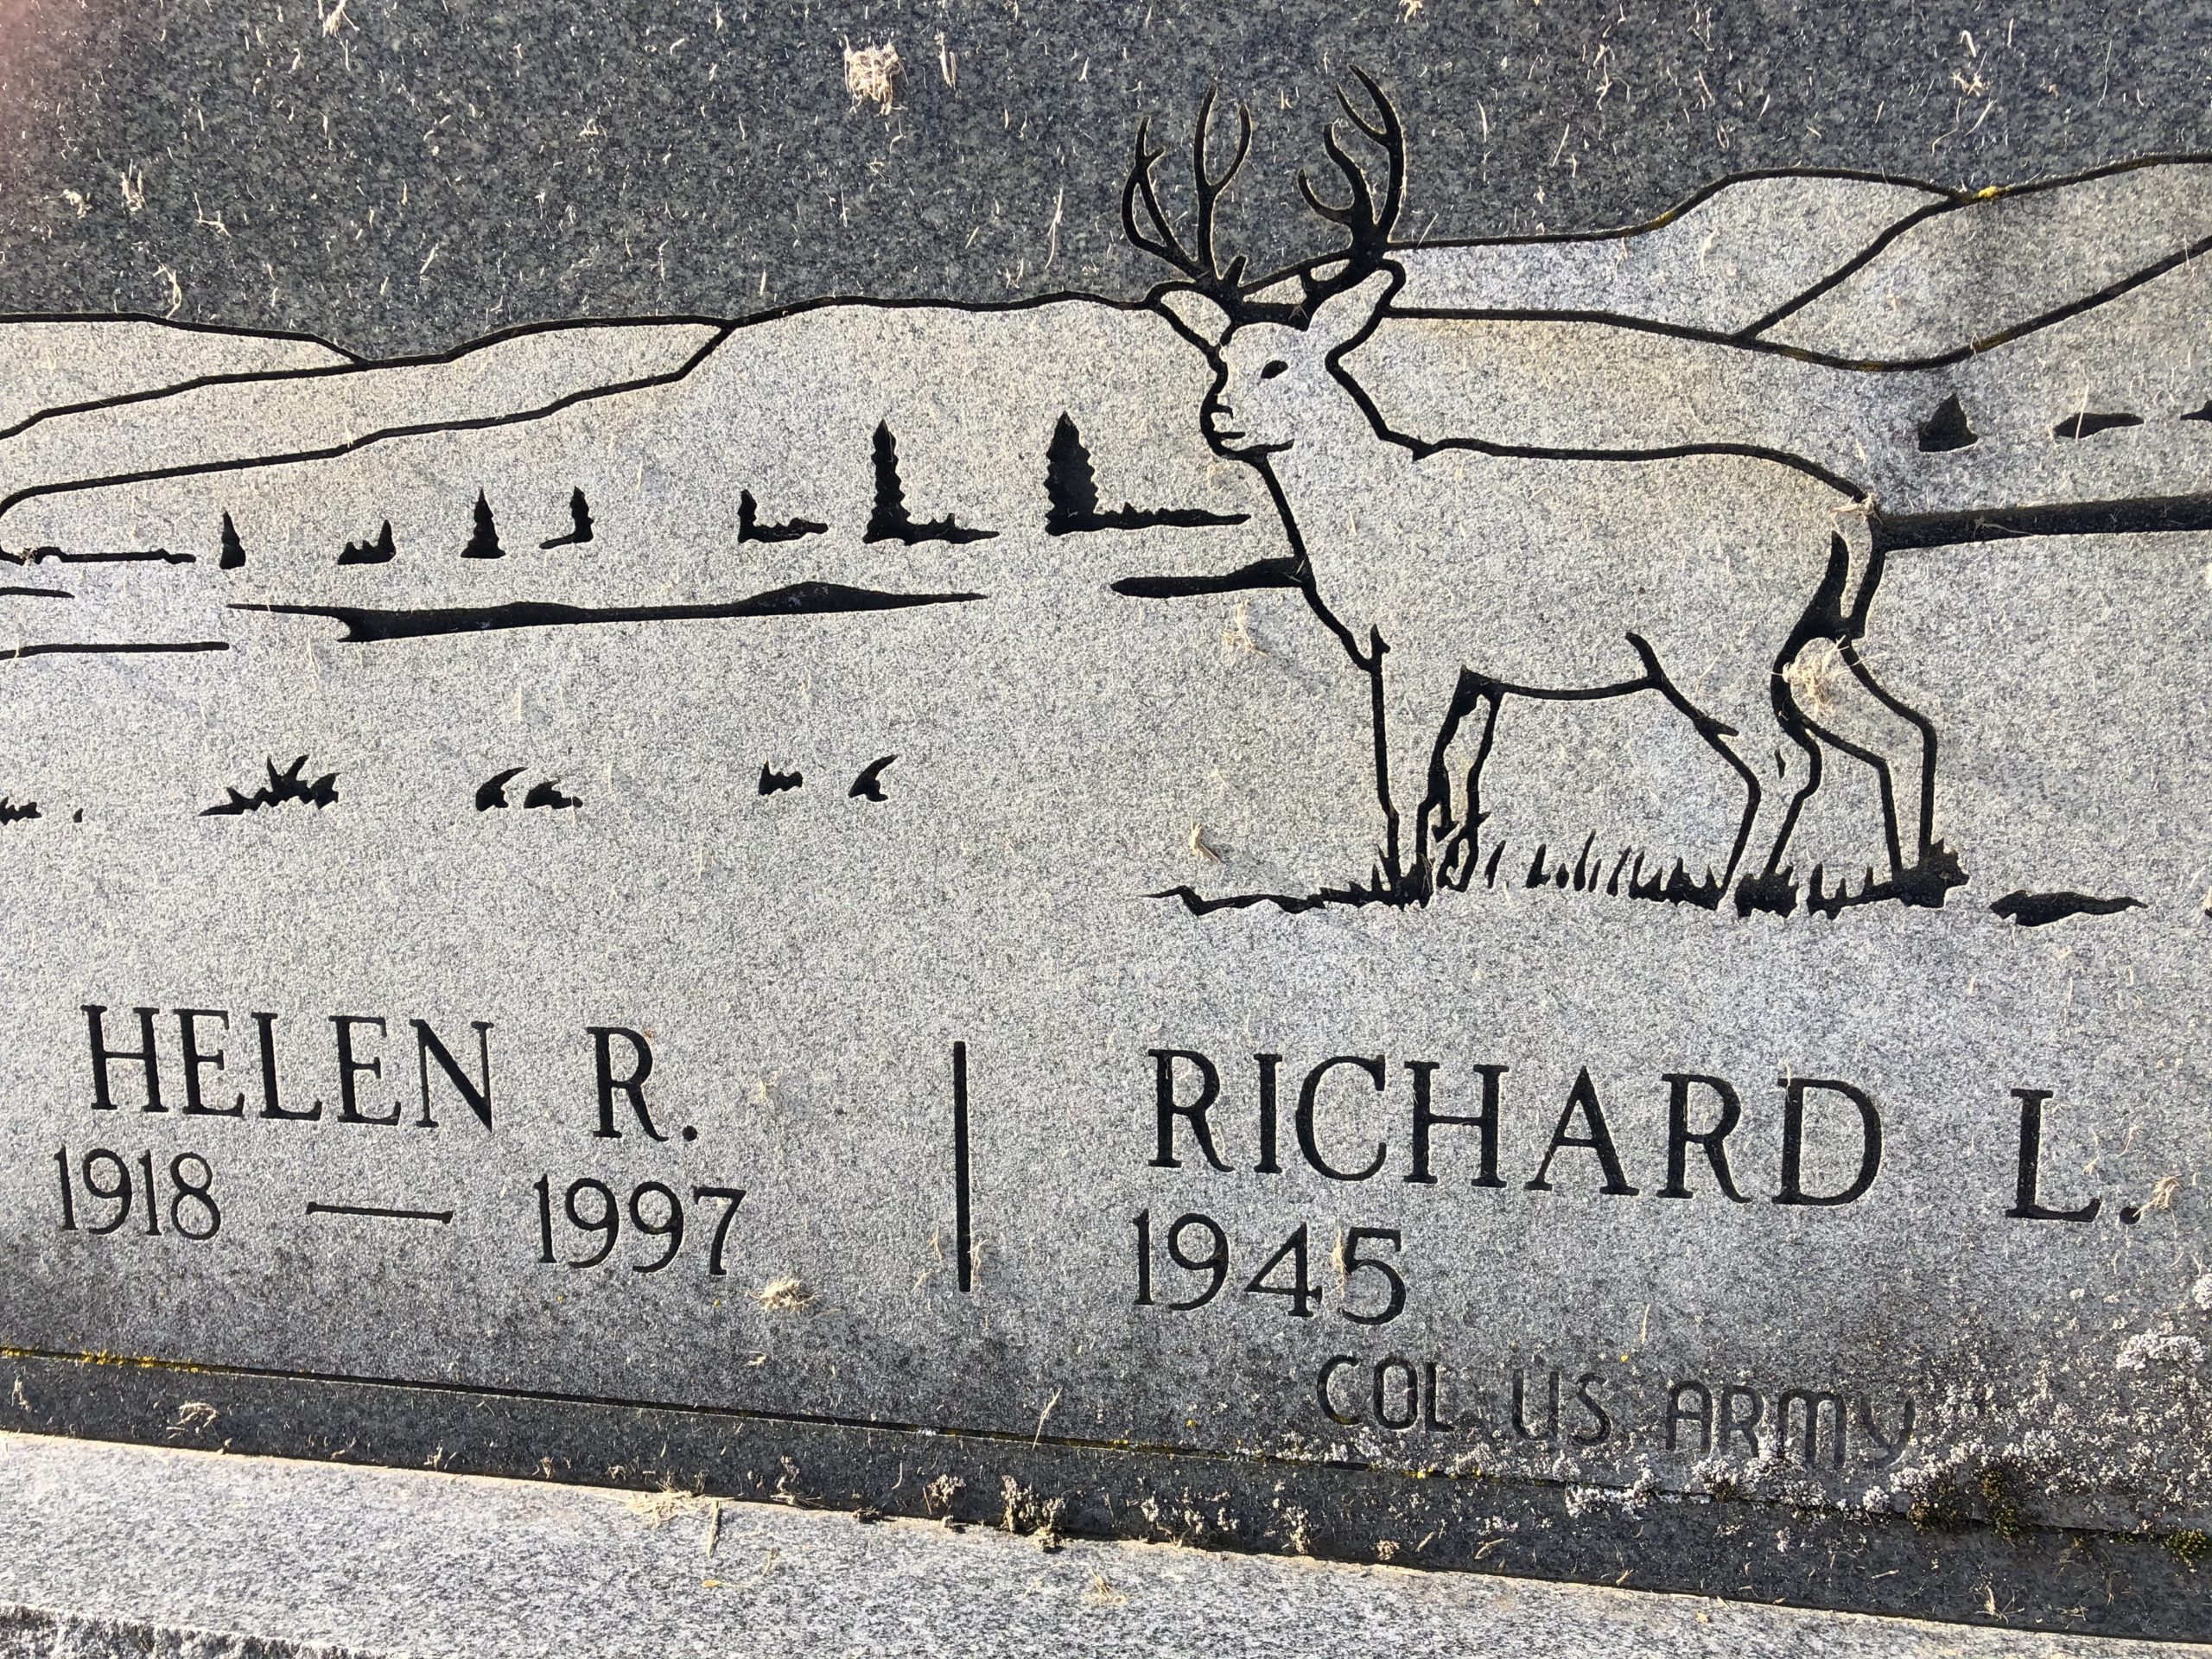 tombstone for Helen R. 1918-1997 and Richard L. 1945-